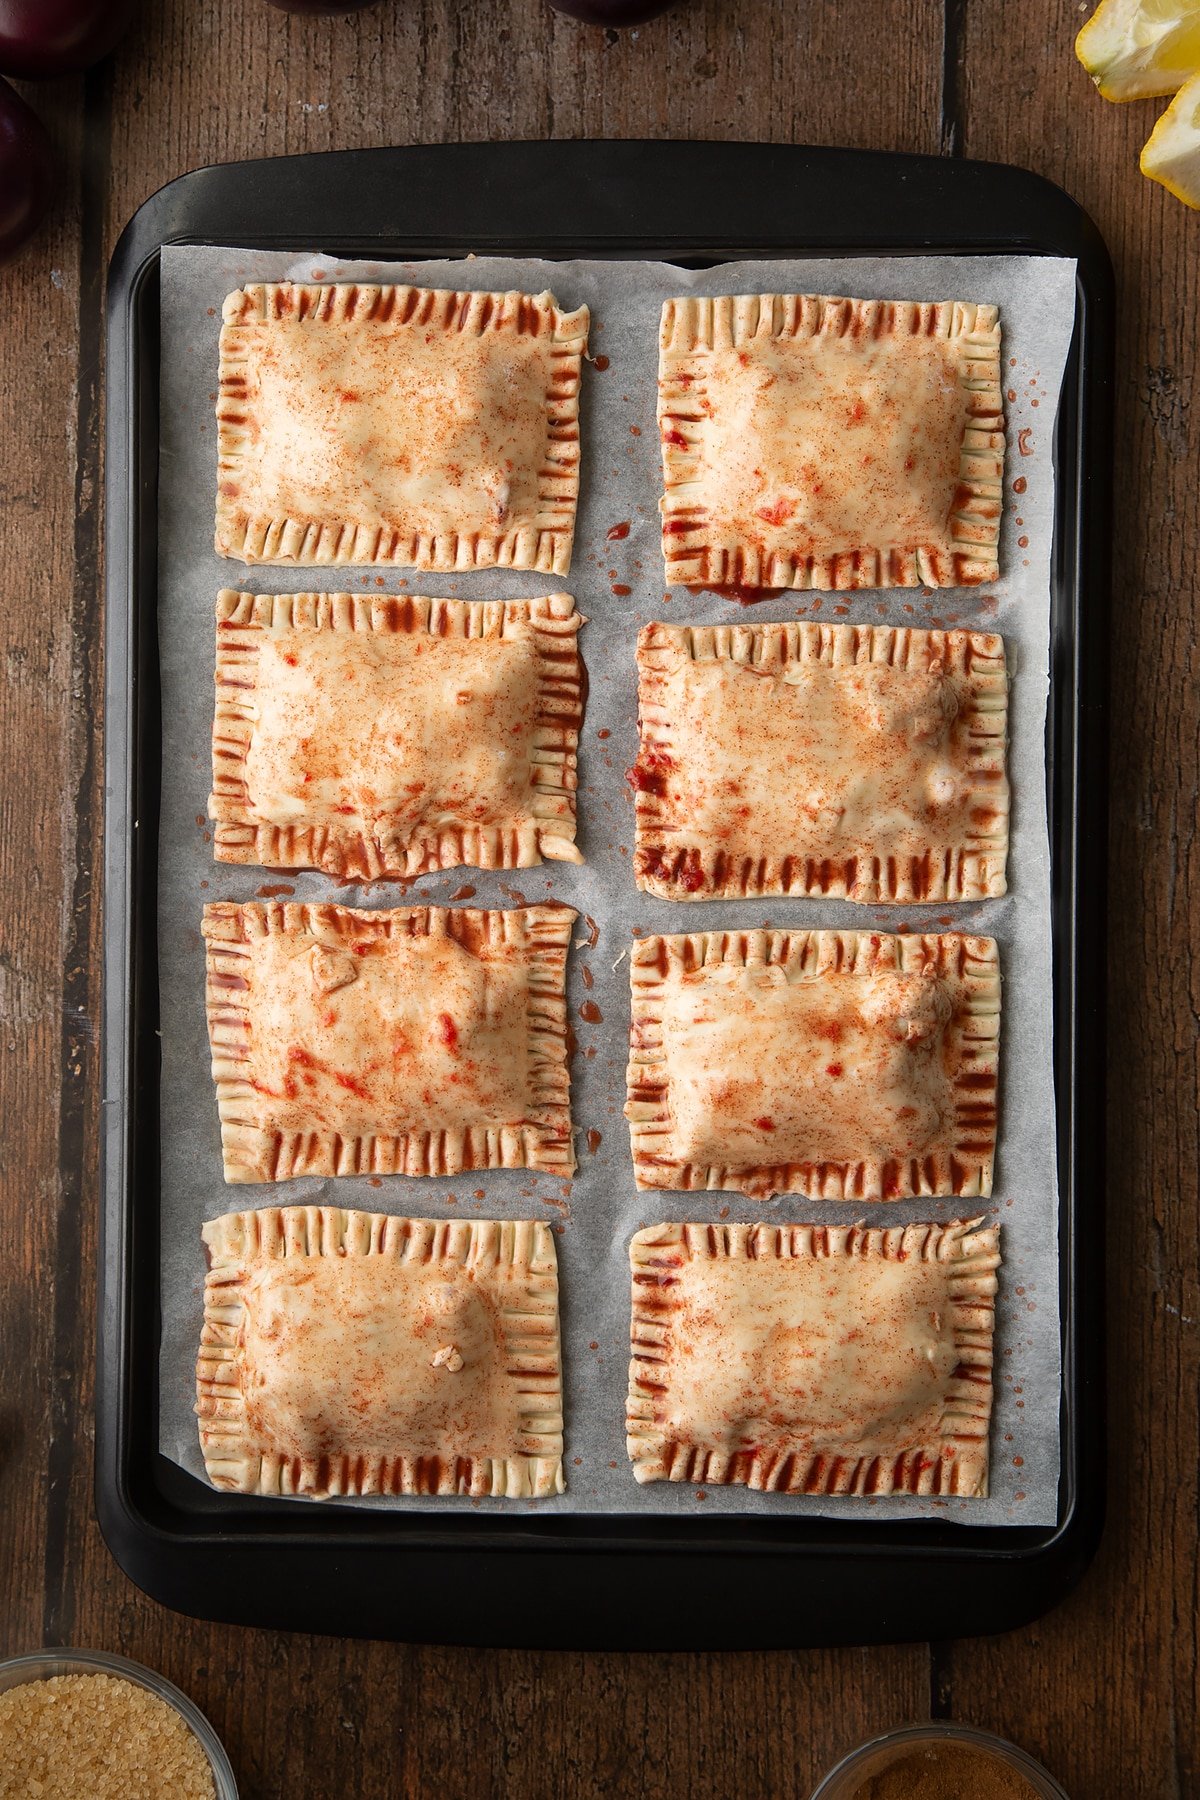 Puff pastry parcels on a baking paper lined tray. The parcels have been brush with plum juice. Ingredients to make a plum pastry recipe surround the tray.